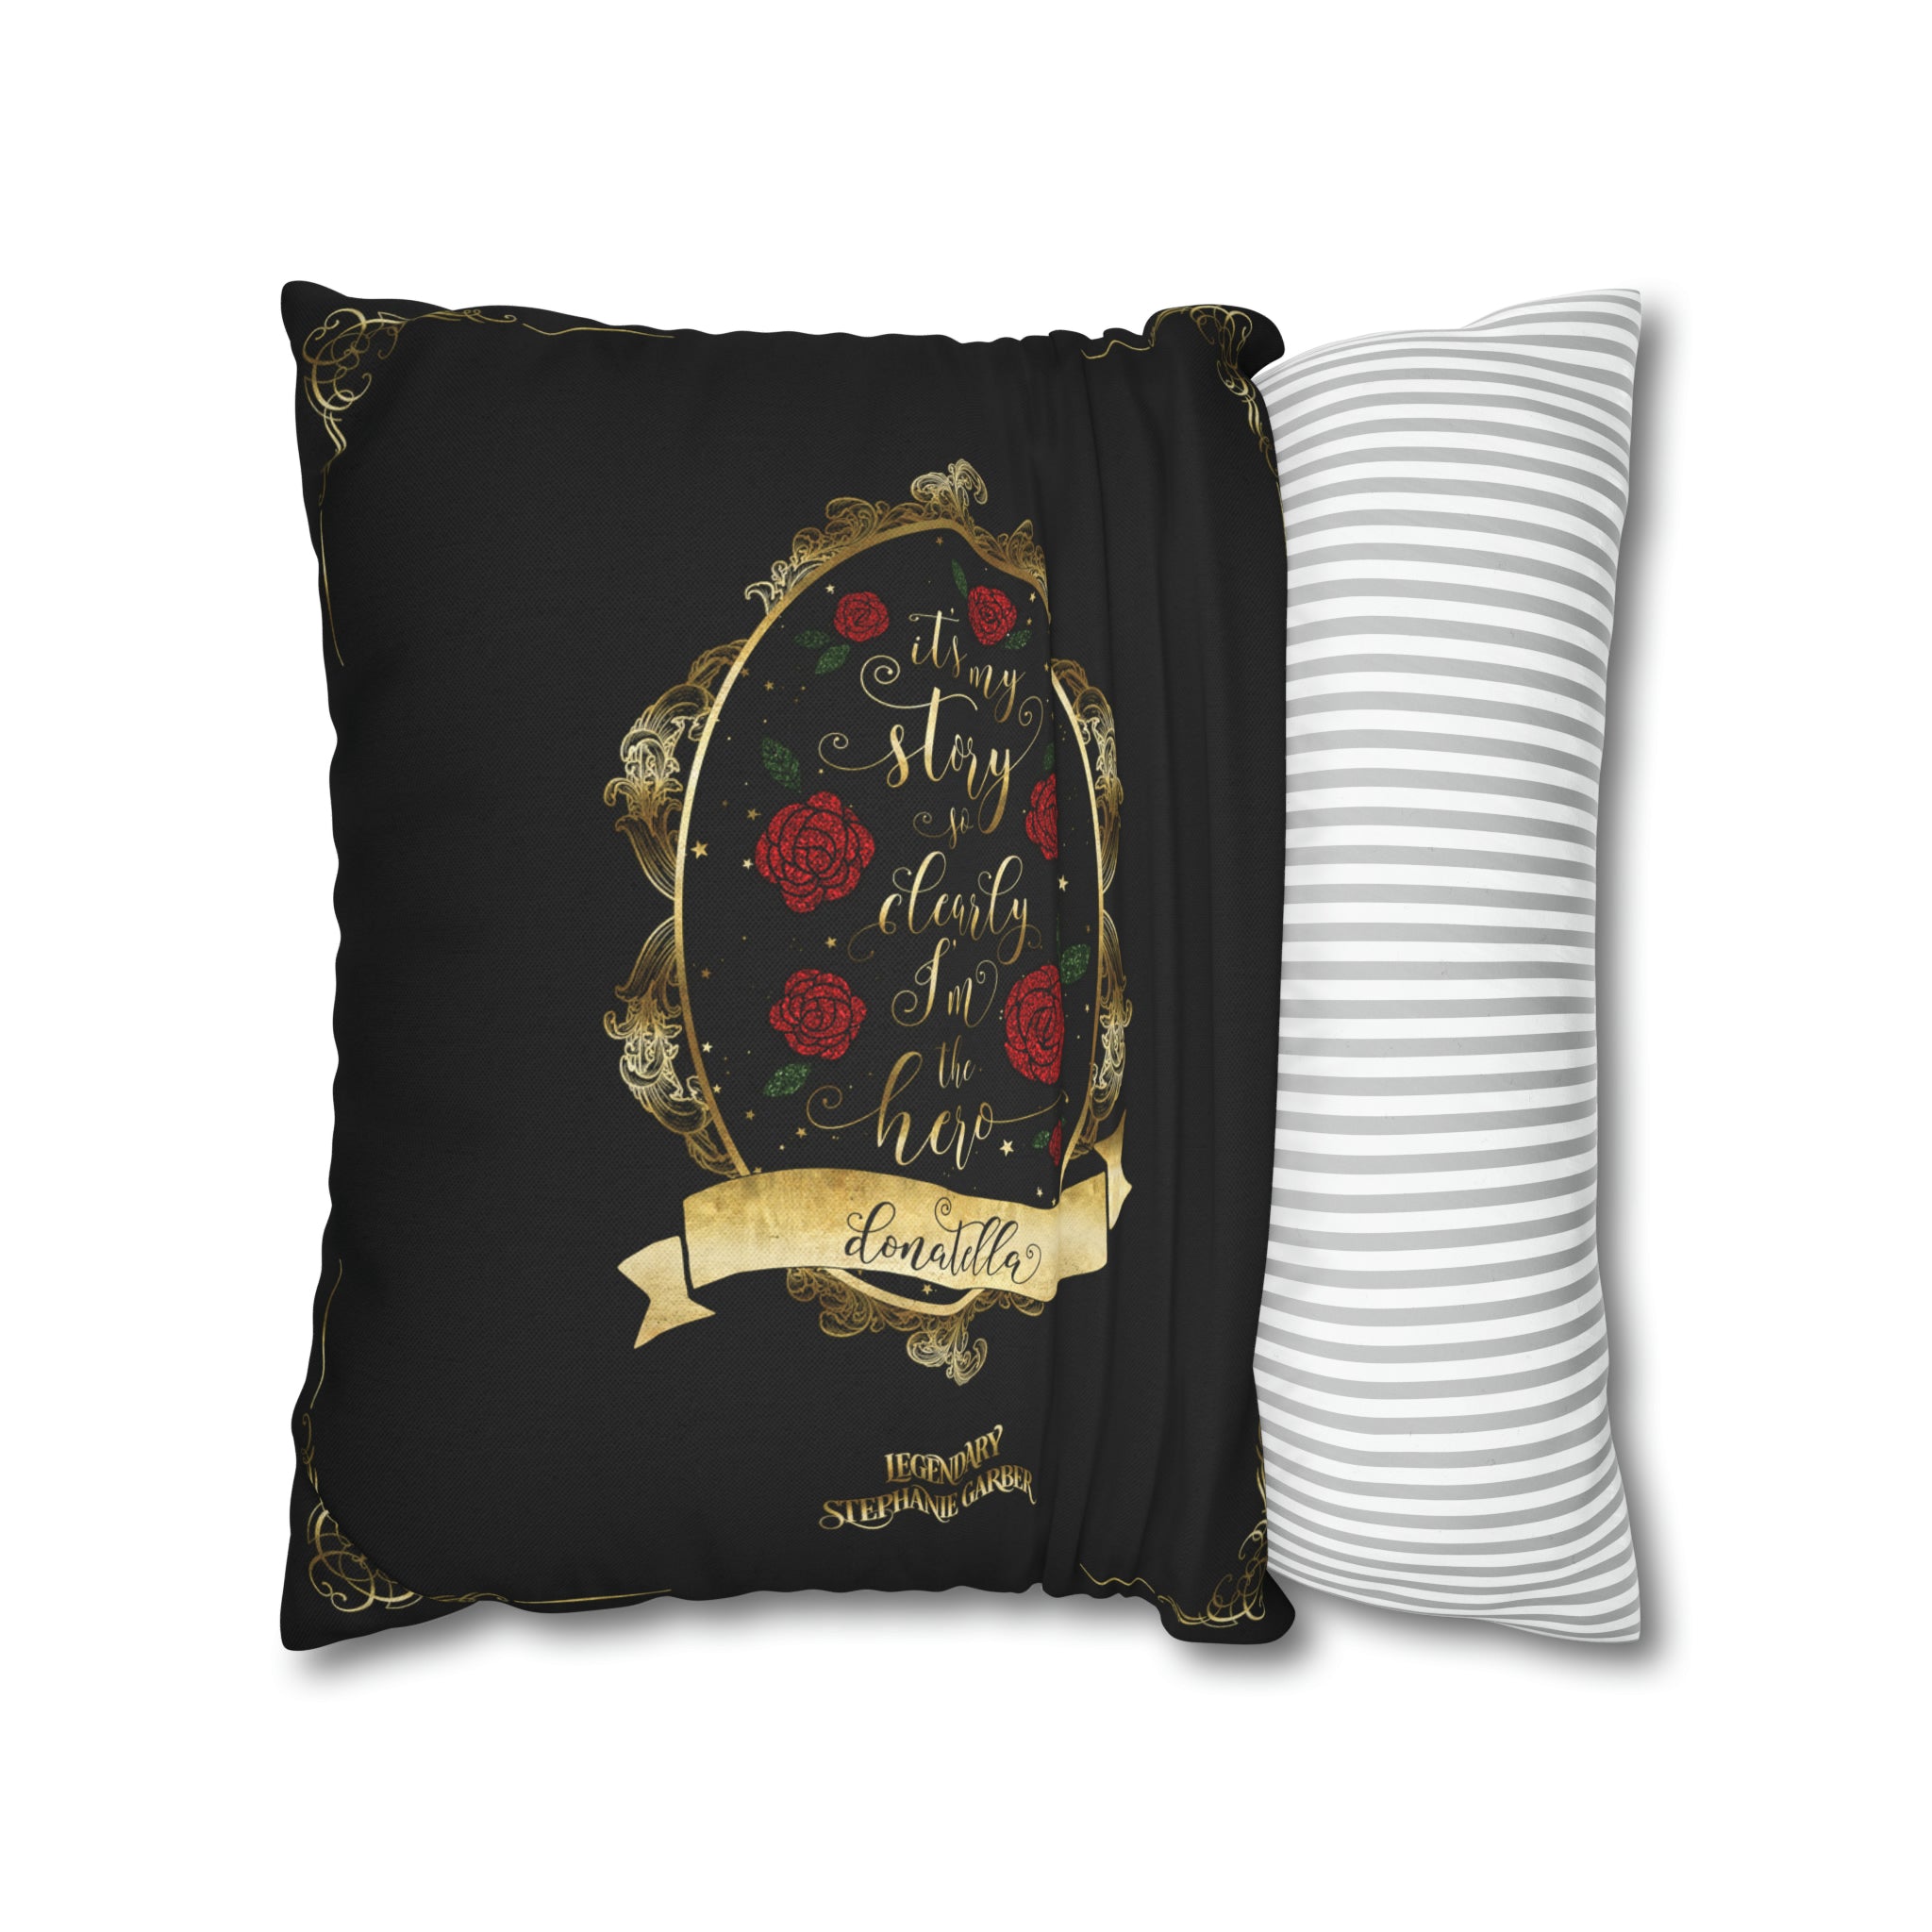 It's my story... Caraval Pillow